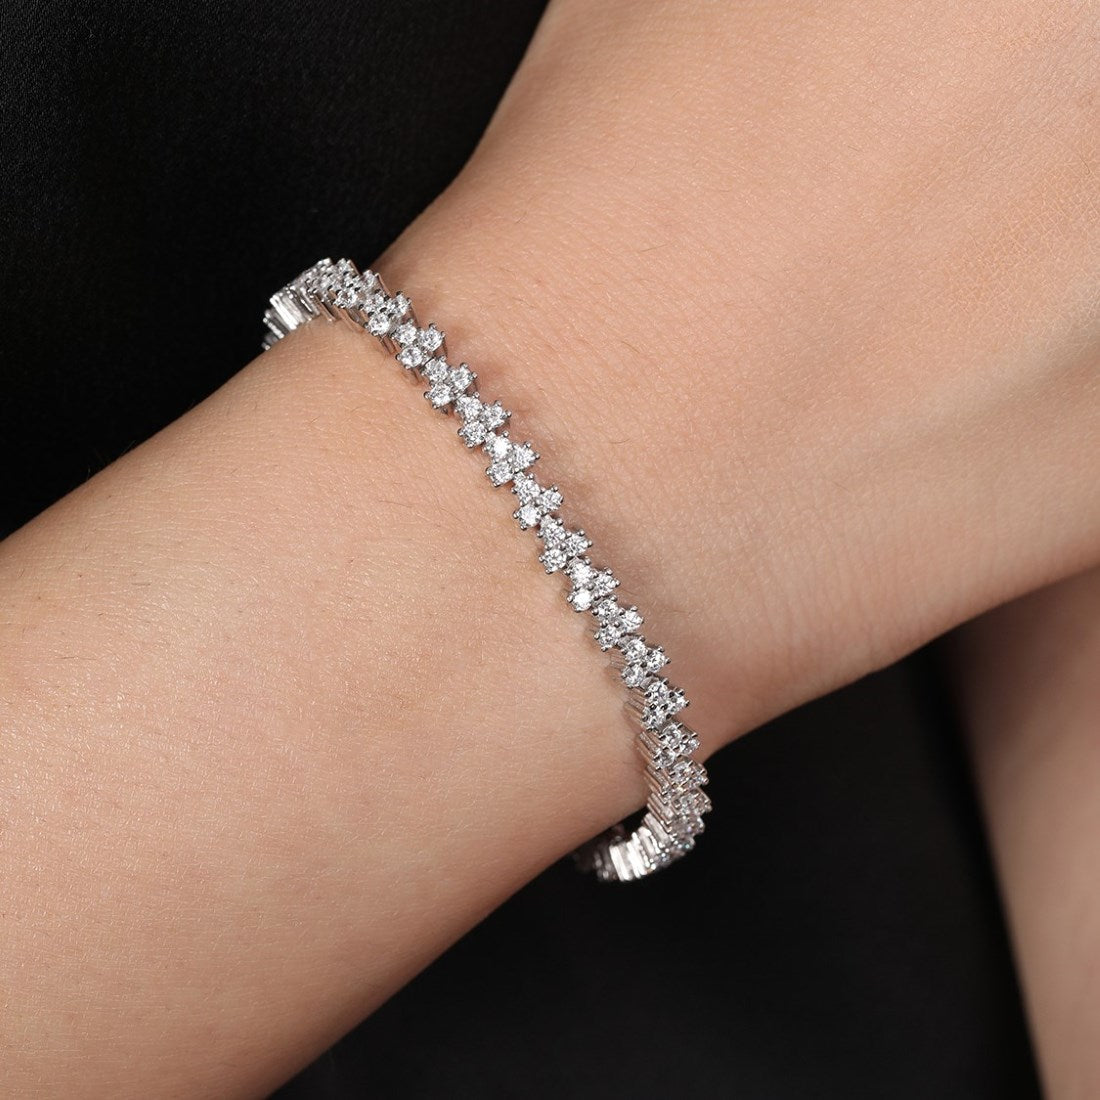 Abstract Elegance Rhodium Plated 925 Sterling Silver Bracelet